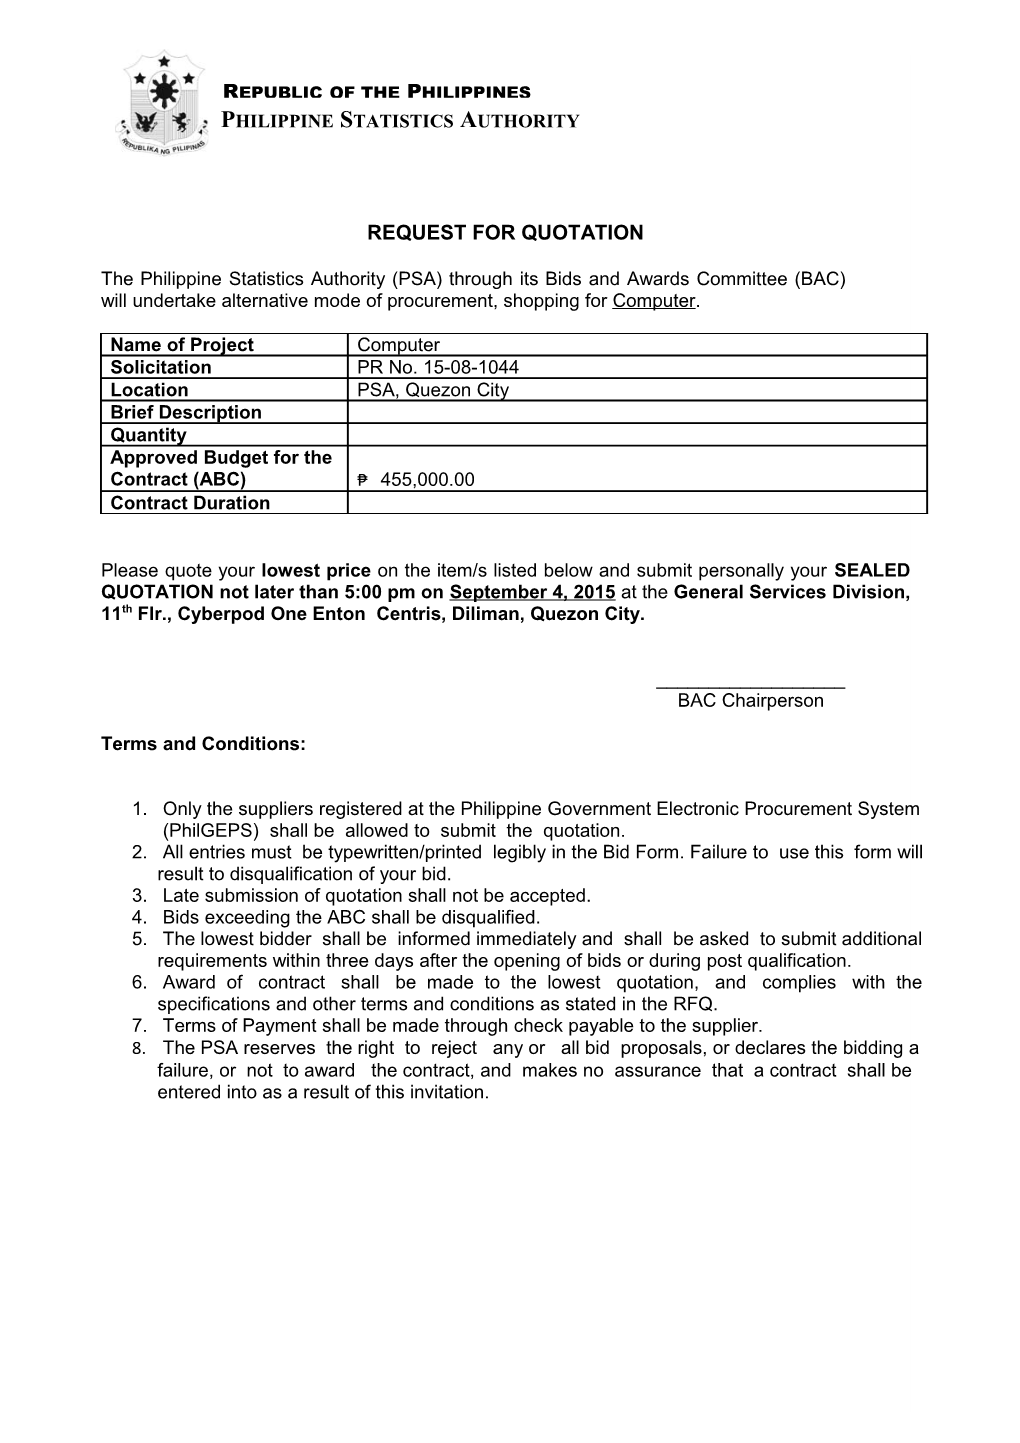 Request for Quotation s11